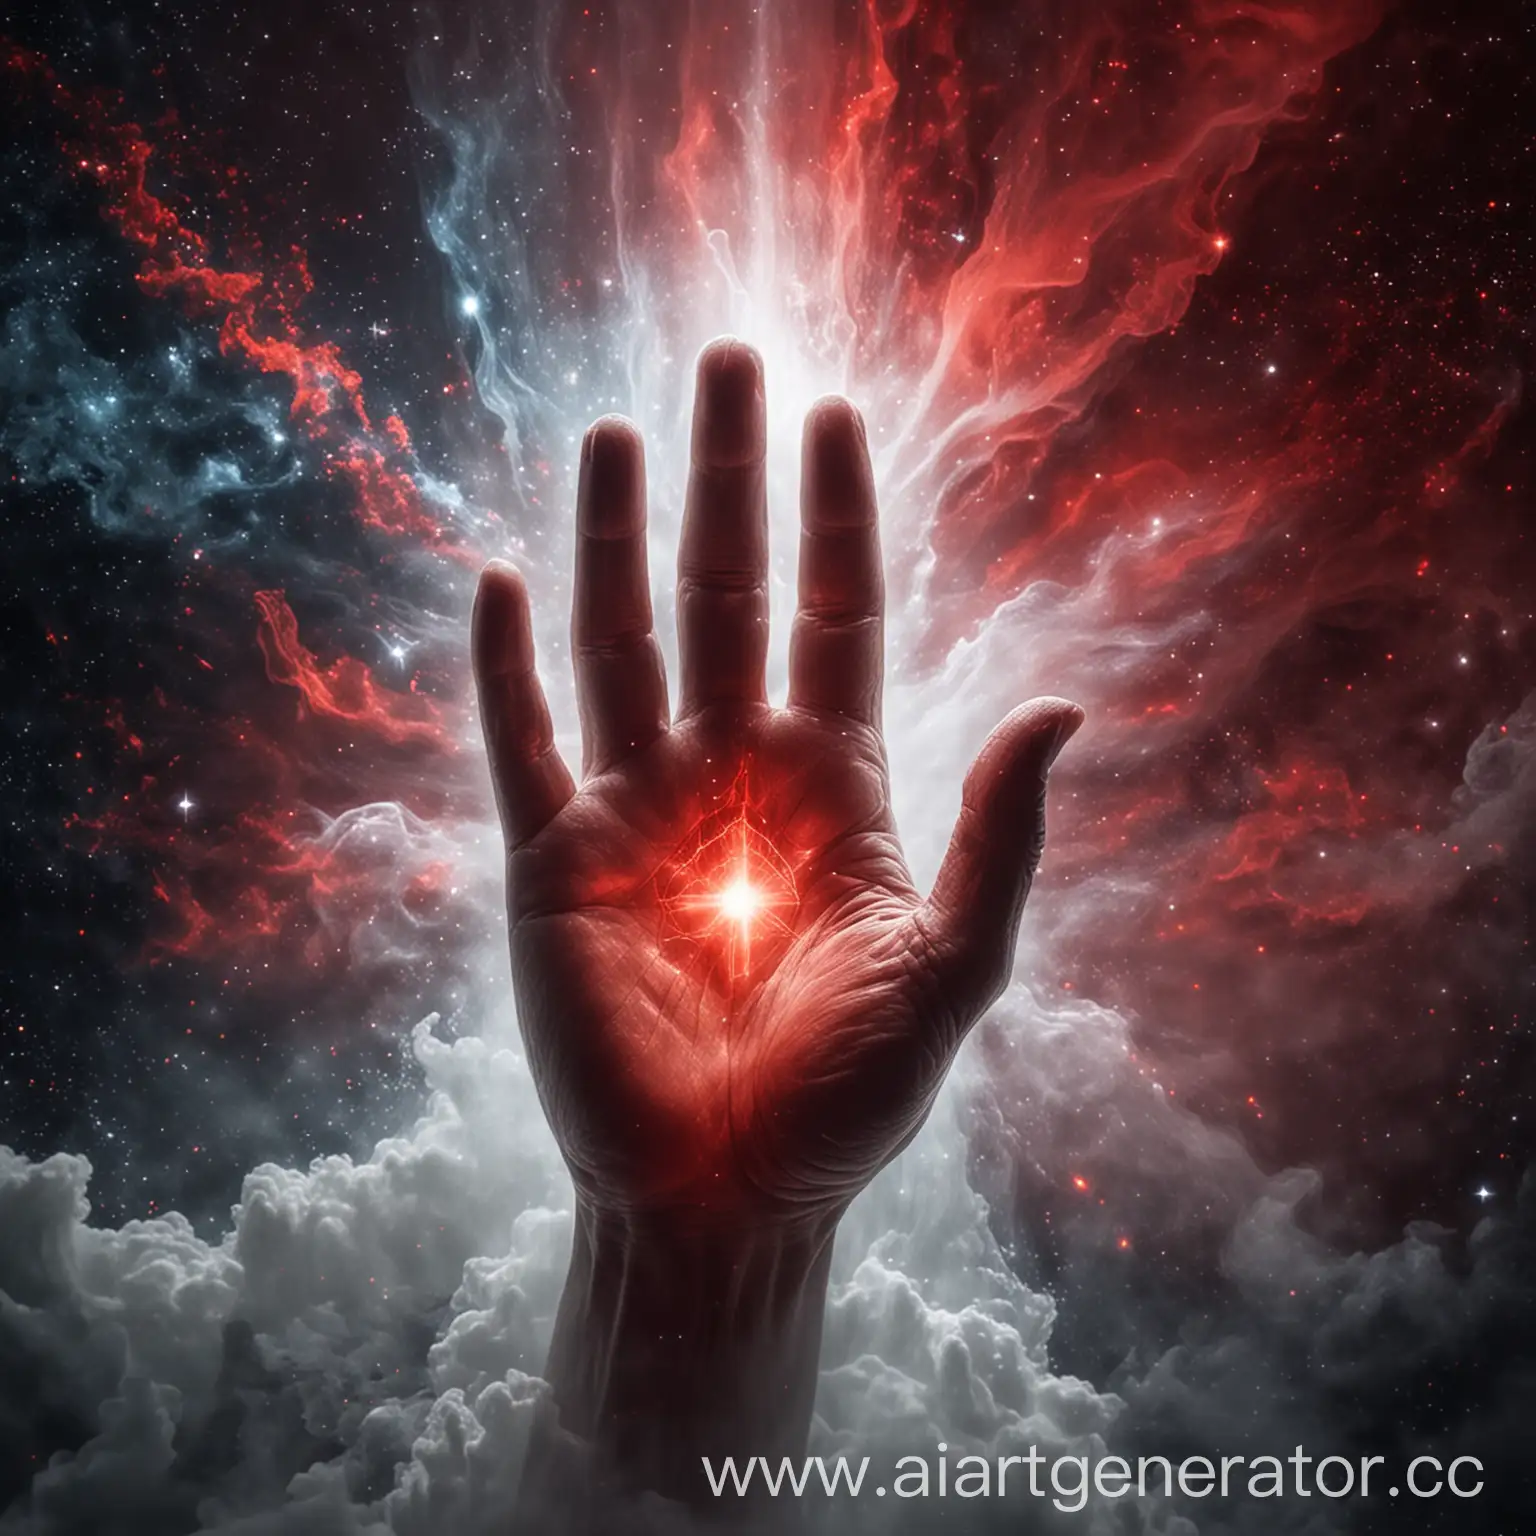 The celestial, from which the red aura emanates, stands in space, among galaxies, is in the fog. There is white energy in his hand